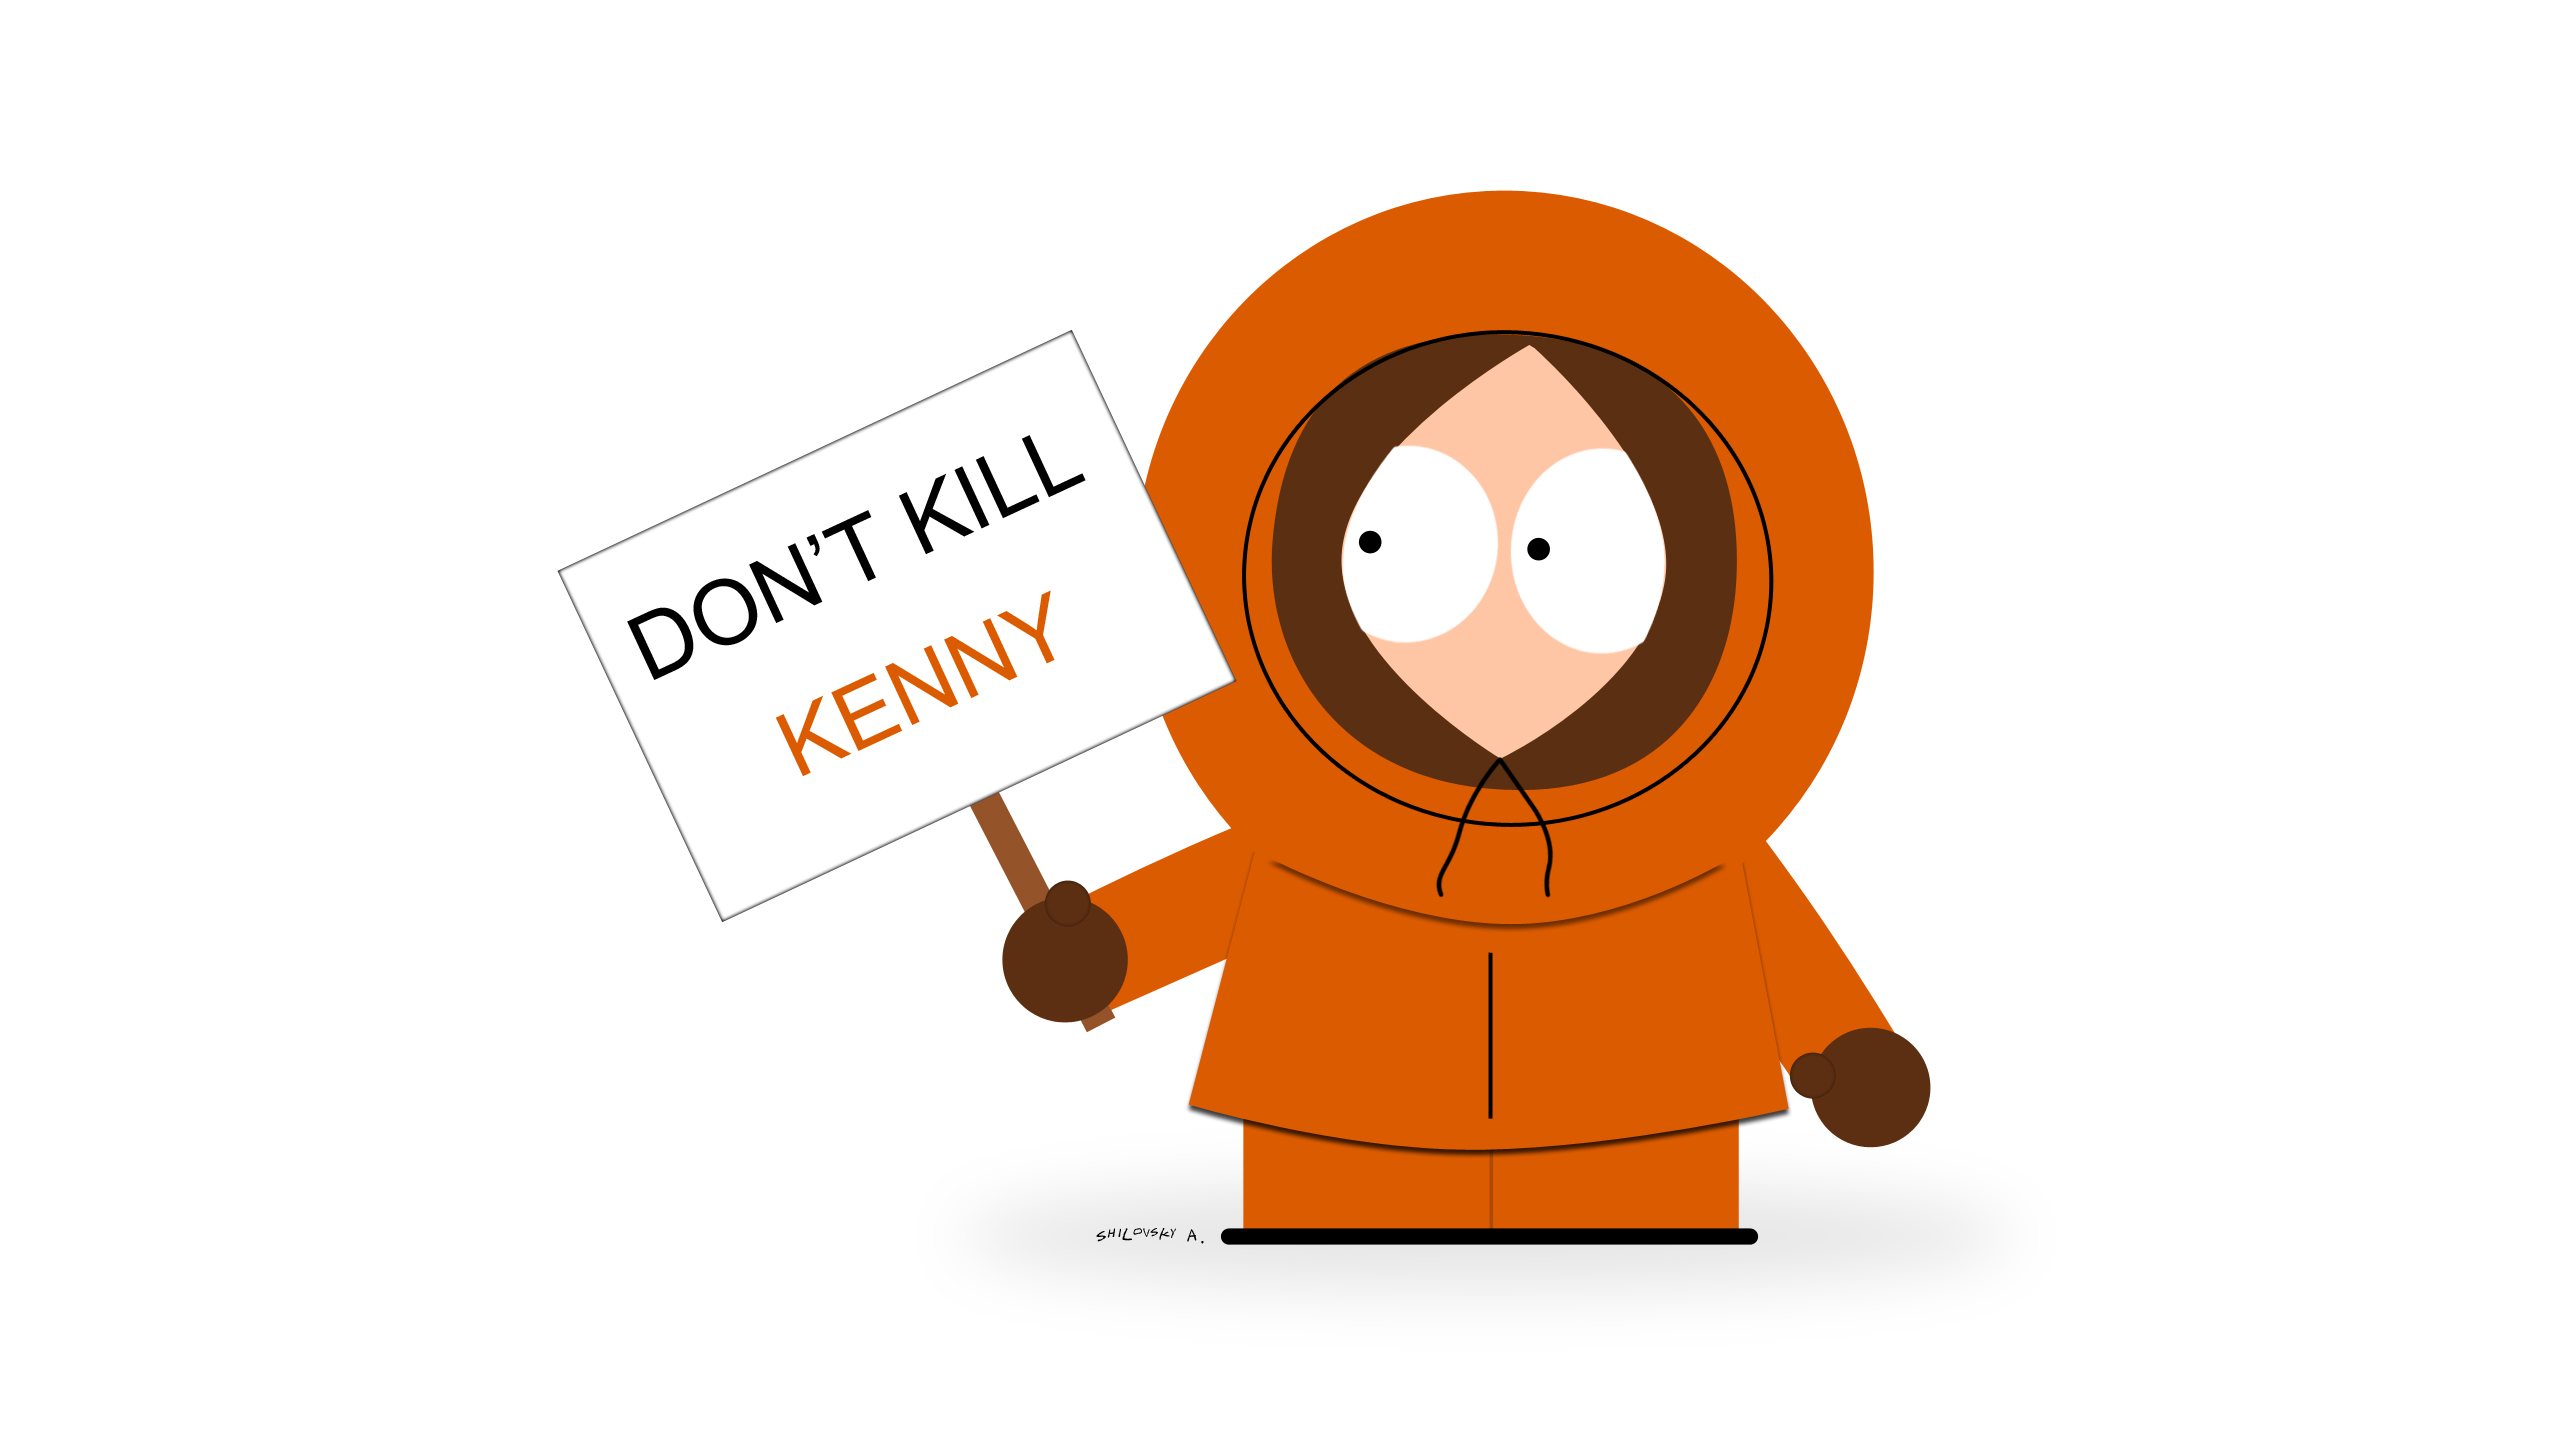 don__t_kill_kenny_by_swift_andrey-d3057x